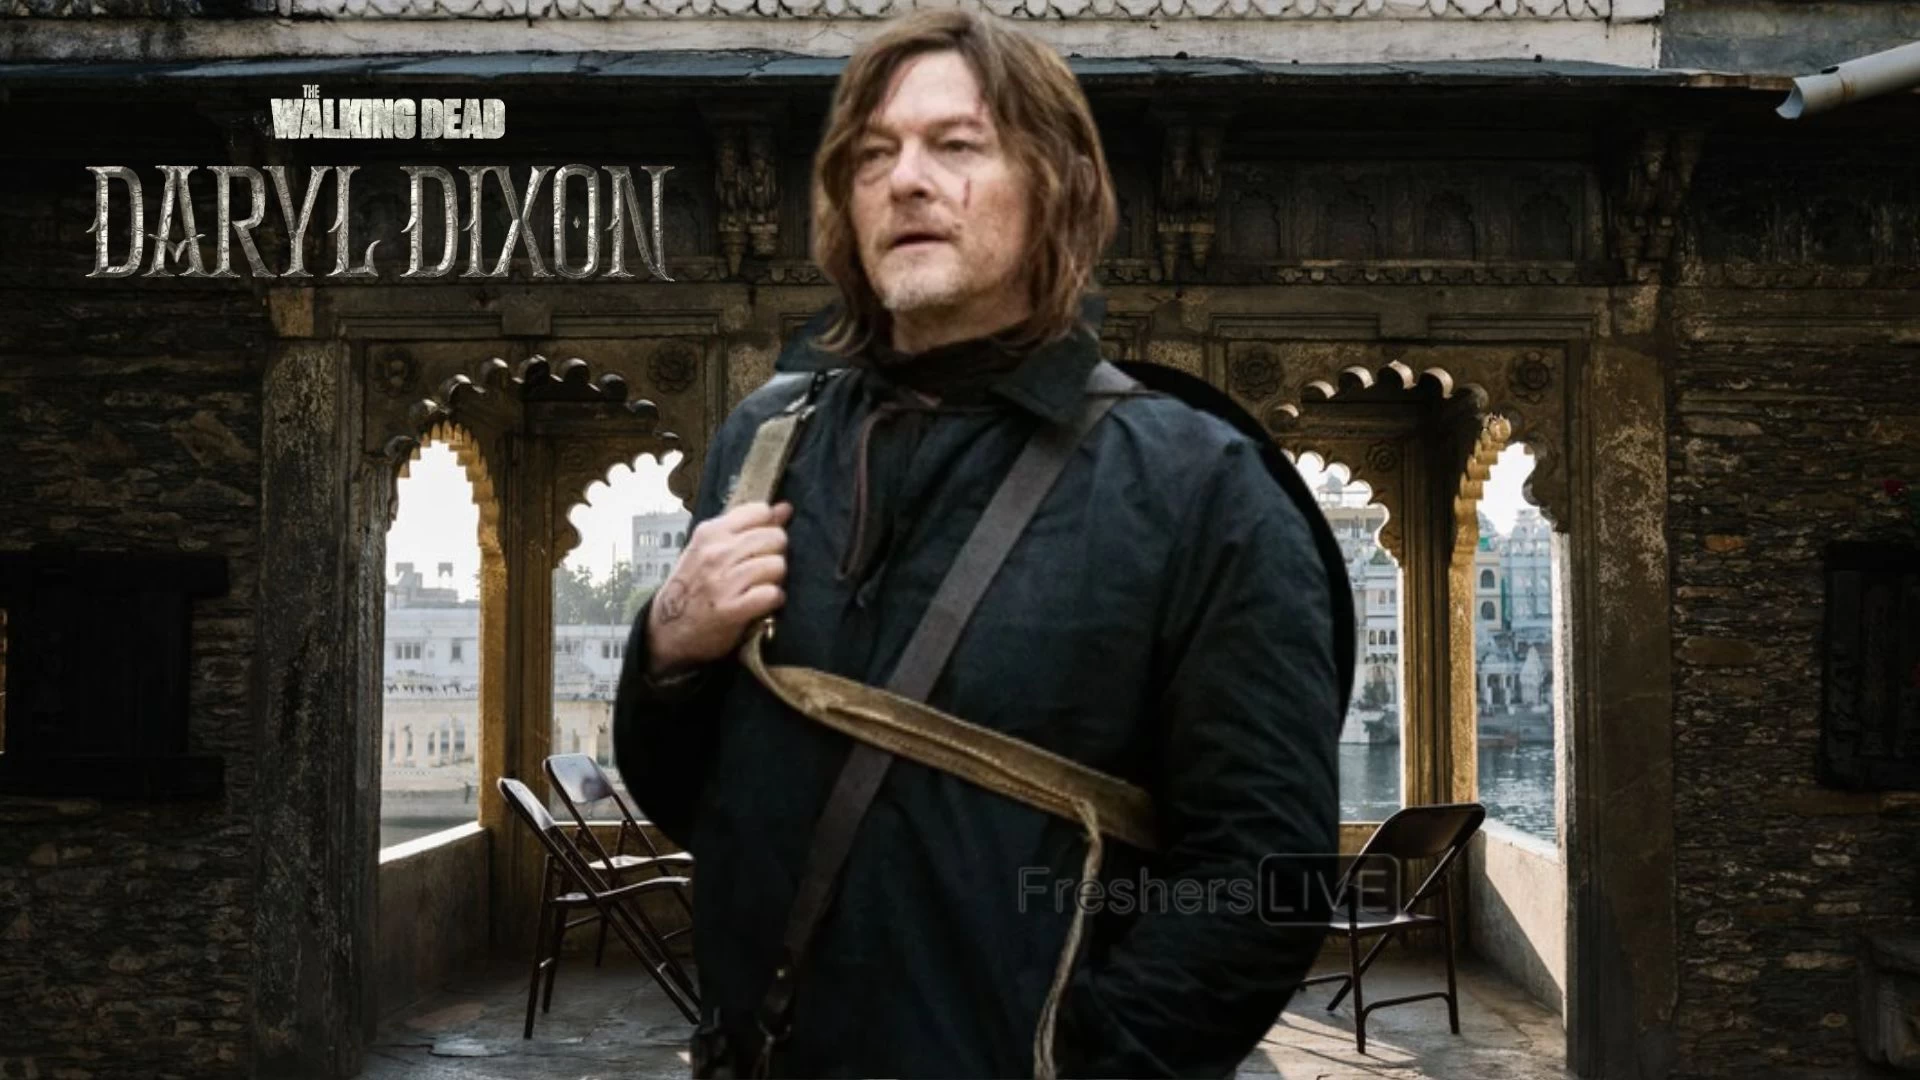 The Walking Dead Daryl Dixon Episode 5 Ending Explained, Release date, Cast, Review, Plot, Where to watch and more